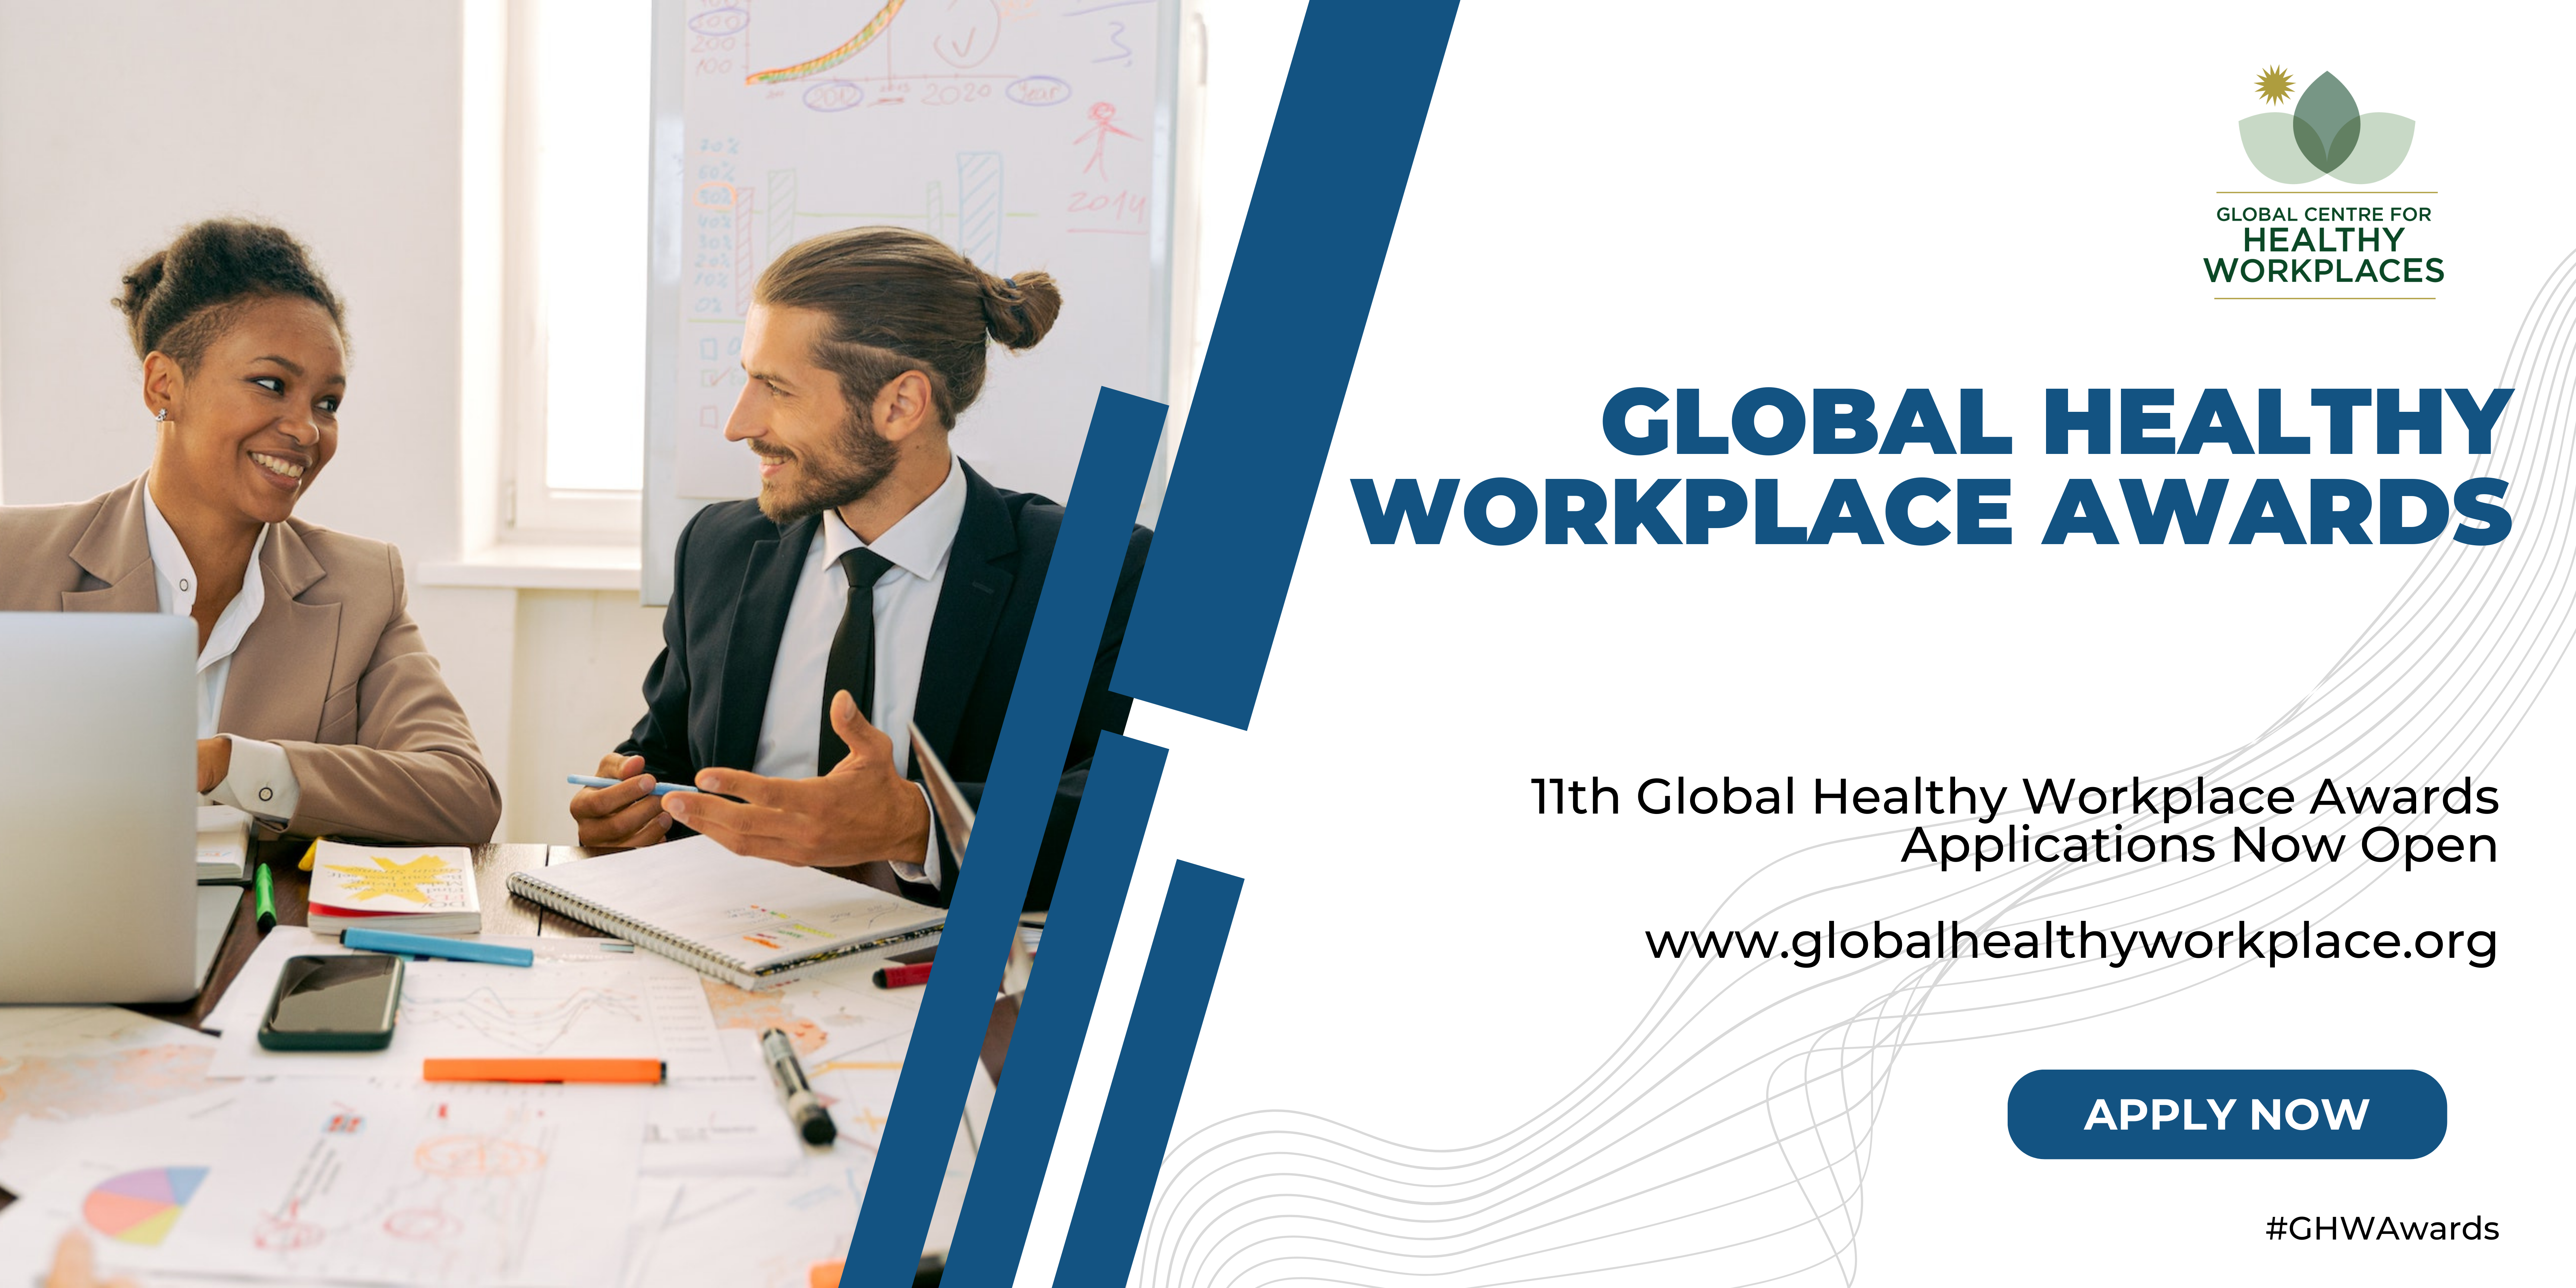 11th Global Healthy Workplace Awards Applications Now Open